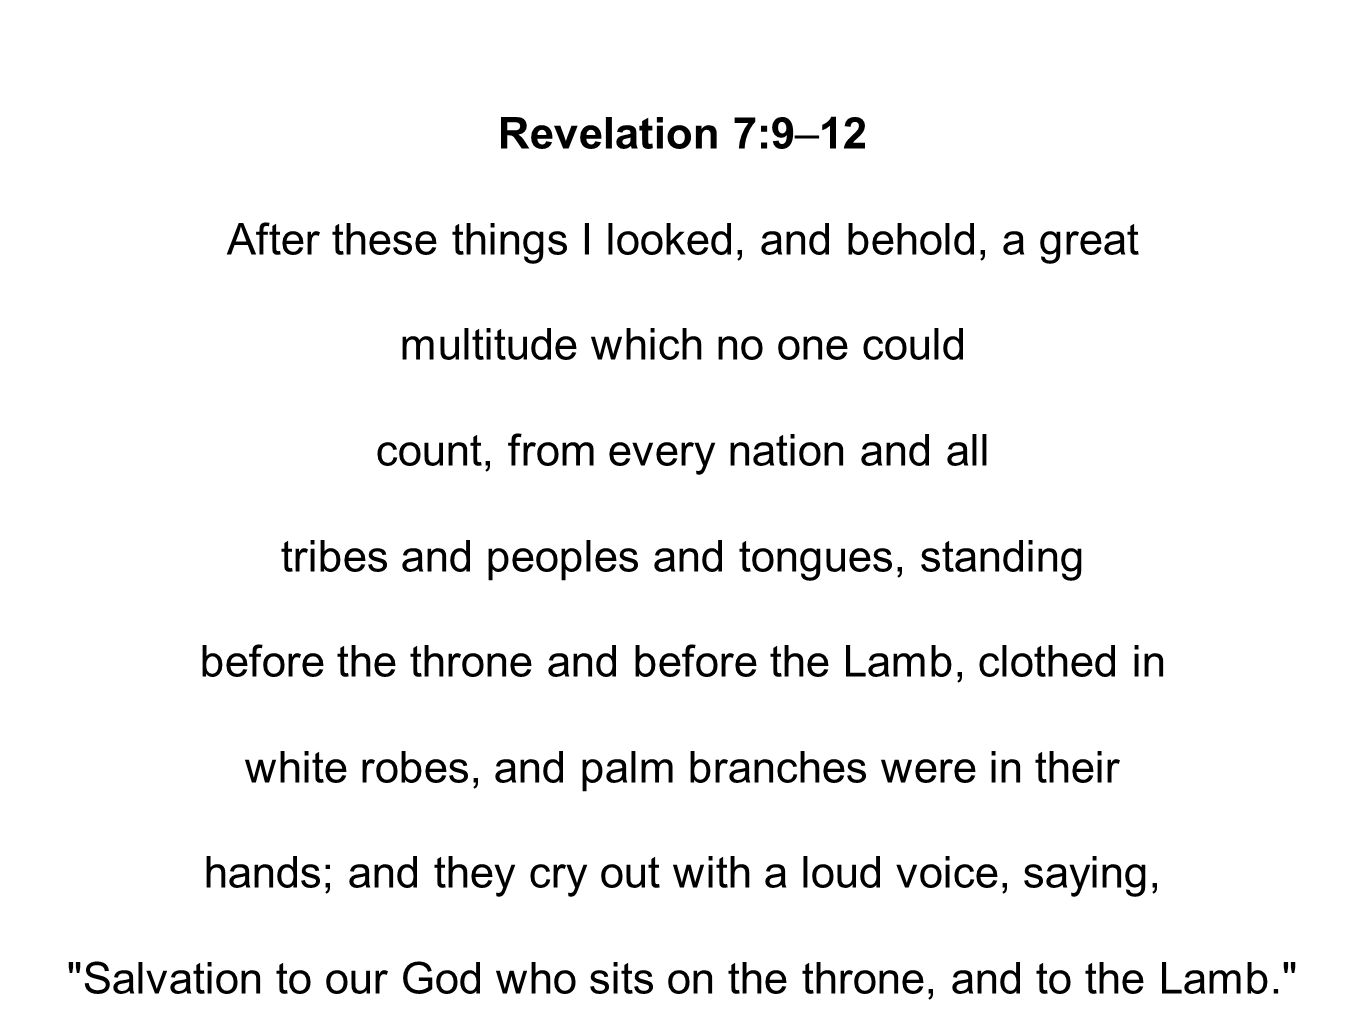 Revelation 7:9–12 After these things I looked, and behold, a great multitude which no one could count, from every nation and all tribes and peoples and tongues, standing before the throne and before the Lamb, clothed in white robes, and palm branches were in their hands; and they cry out with a loud voice, saying, Salvation to our God who sits on the throne, and to the Lamb.